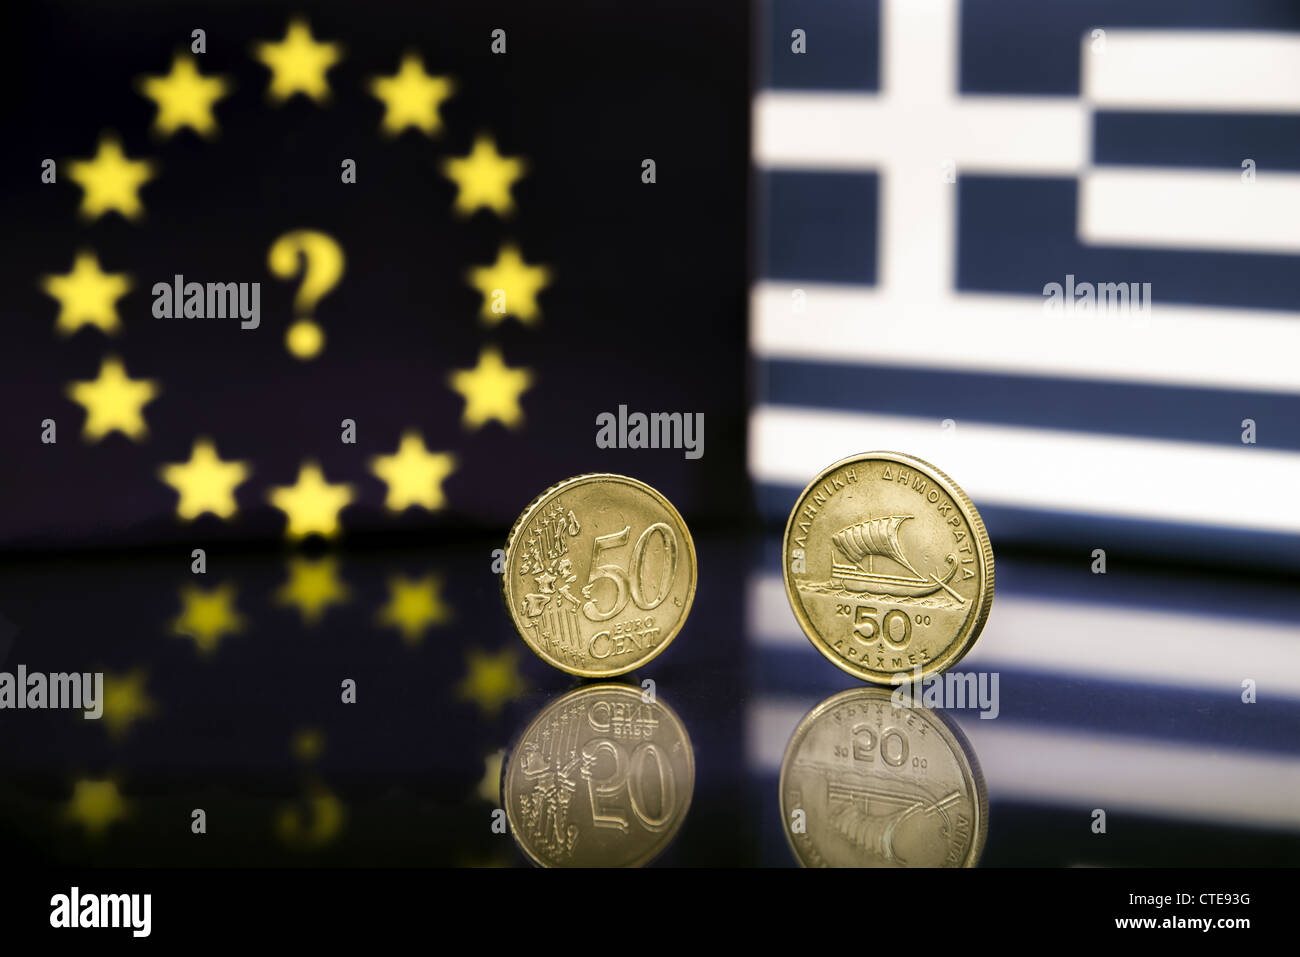 Greek Eurozone & monetary crisis signifying the indecision of Greece's future in the single currency Stock Photo